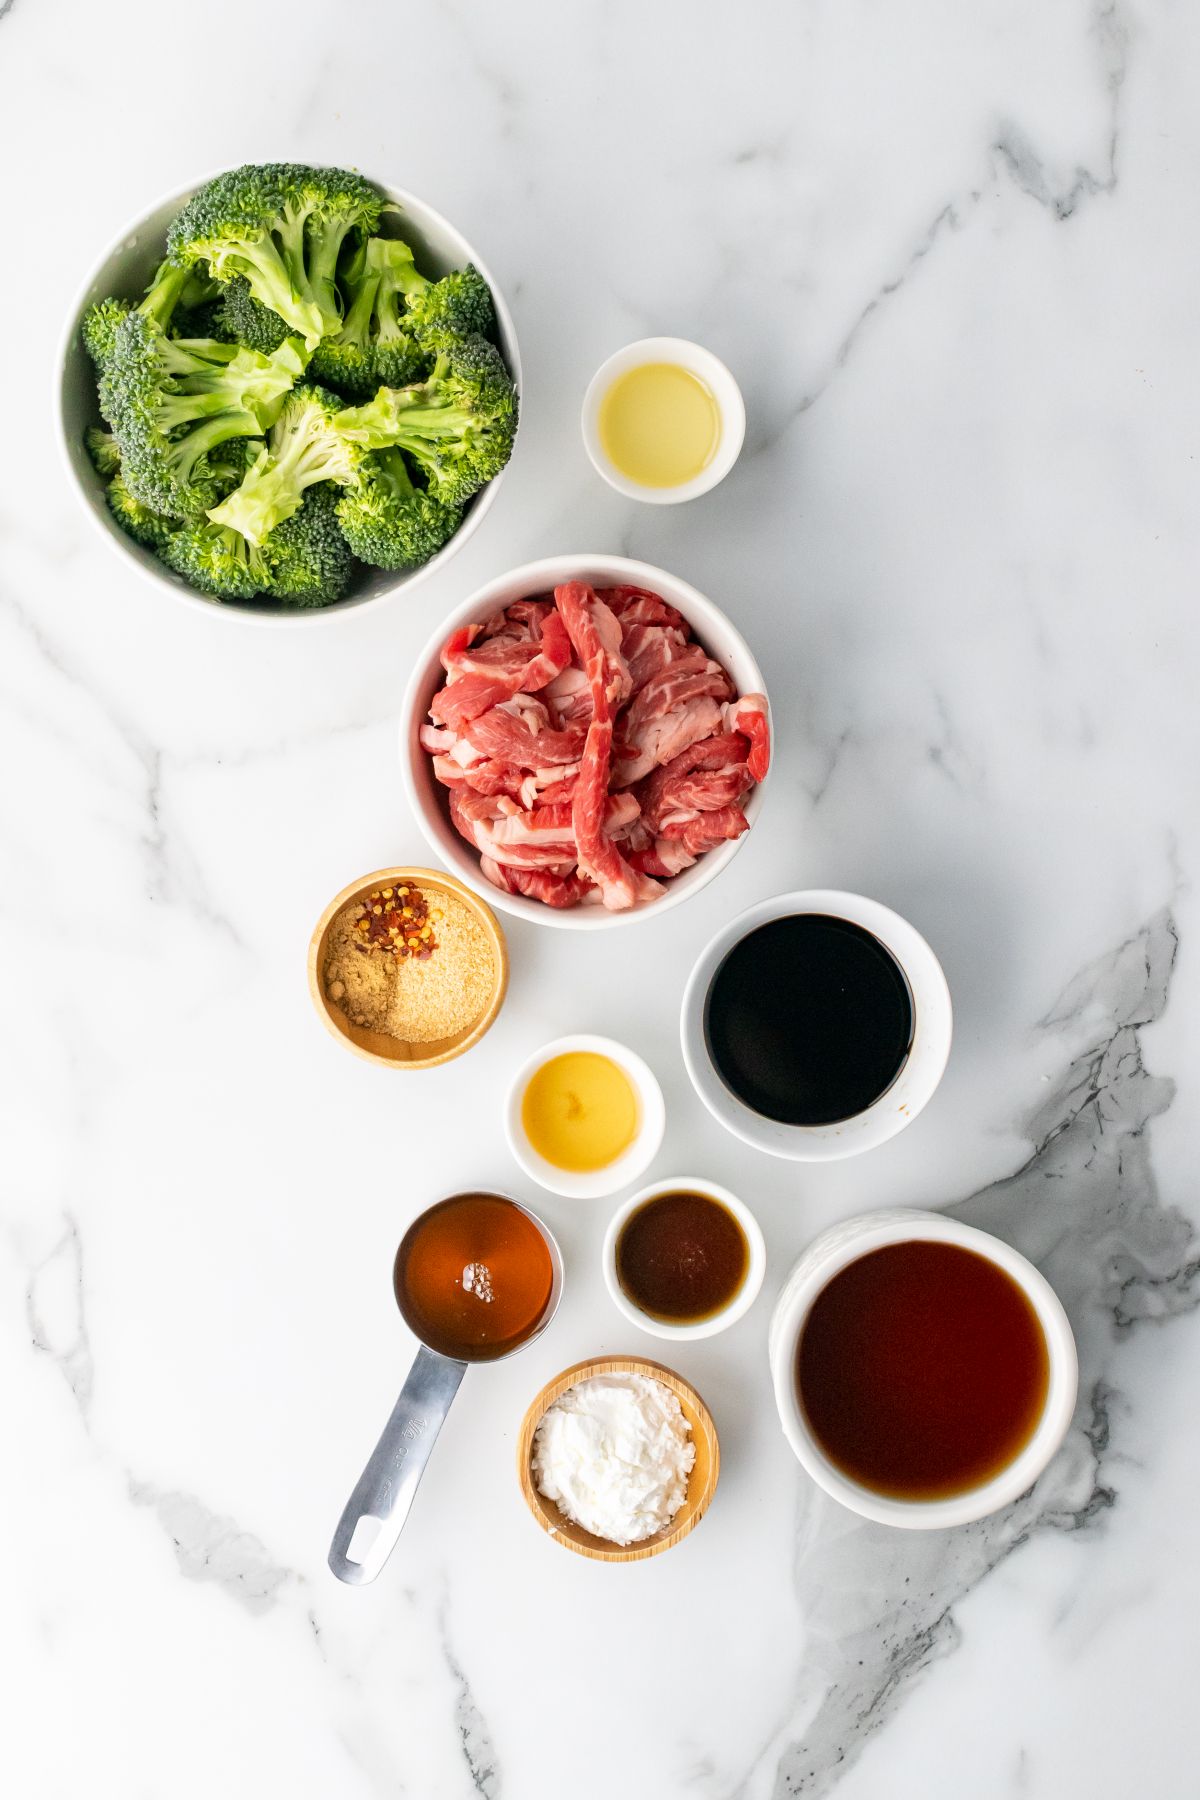 Beef and broccoli ingredients